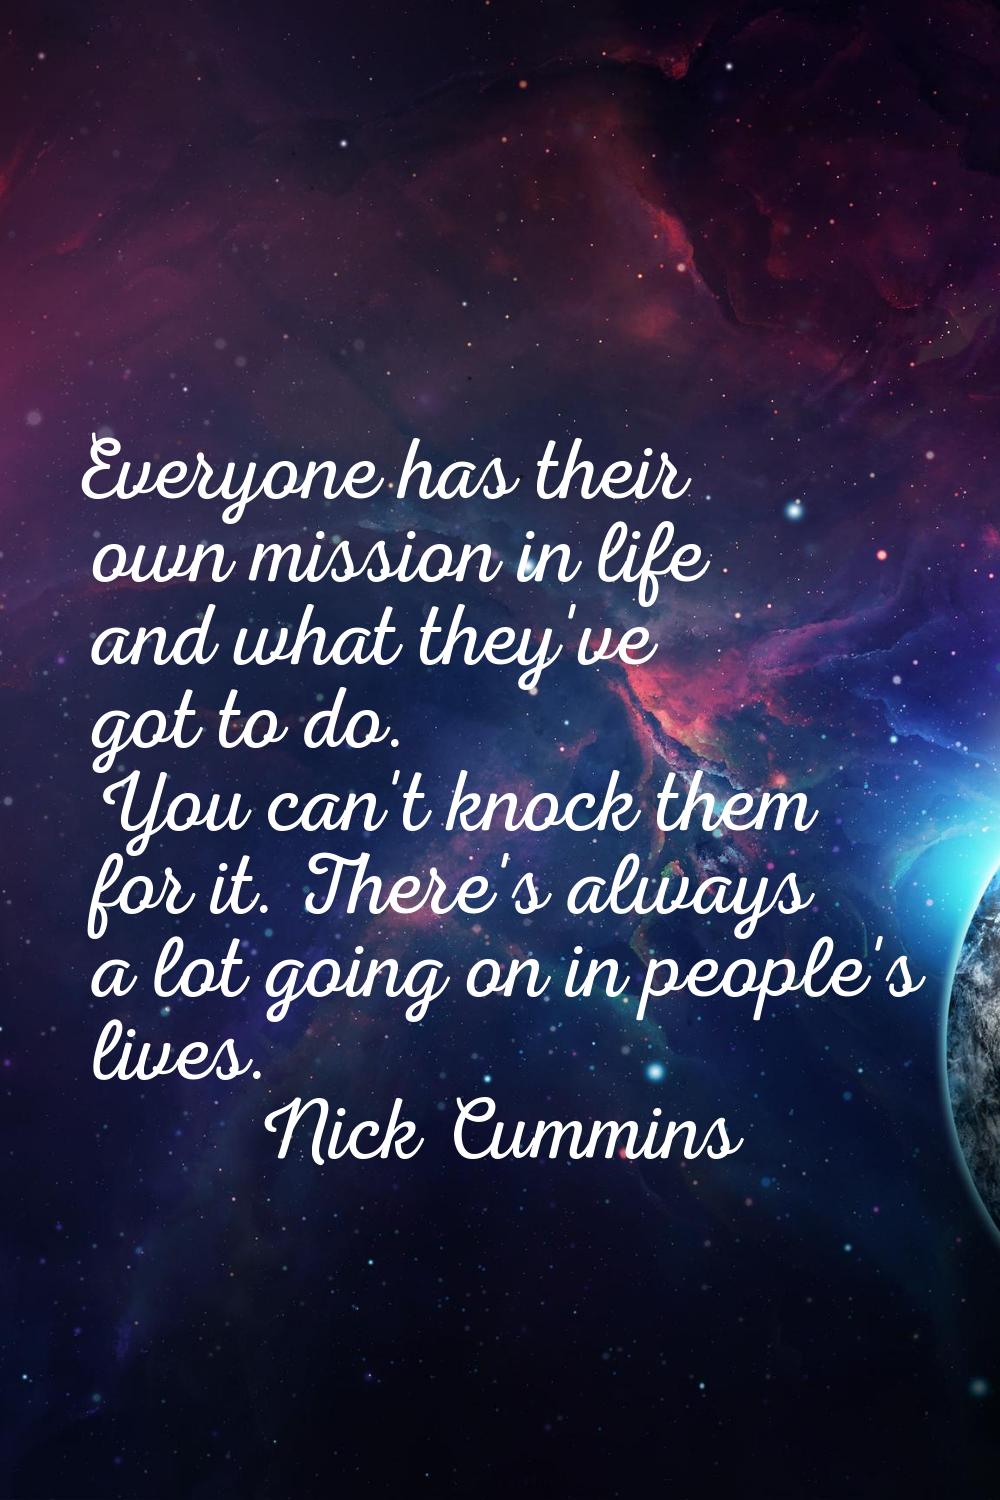 Everyone has their own mission in life and what they've got to do. You can't knock them for it. The